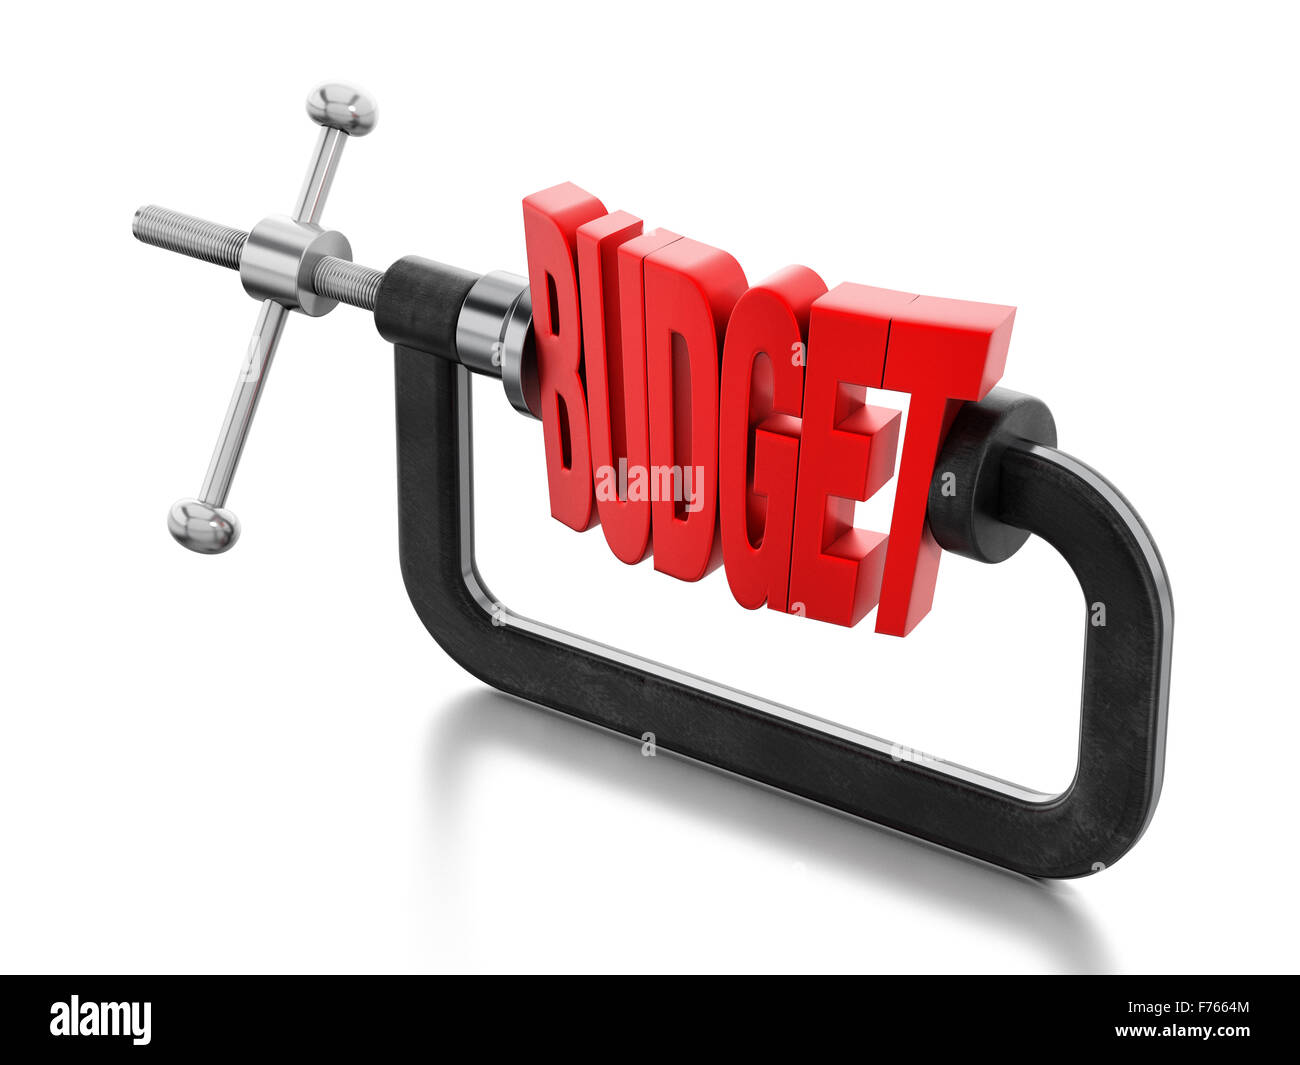 Red budget word clamped inside the vice. Stock Photo